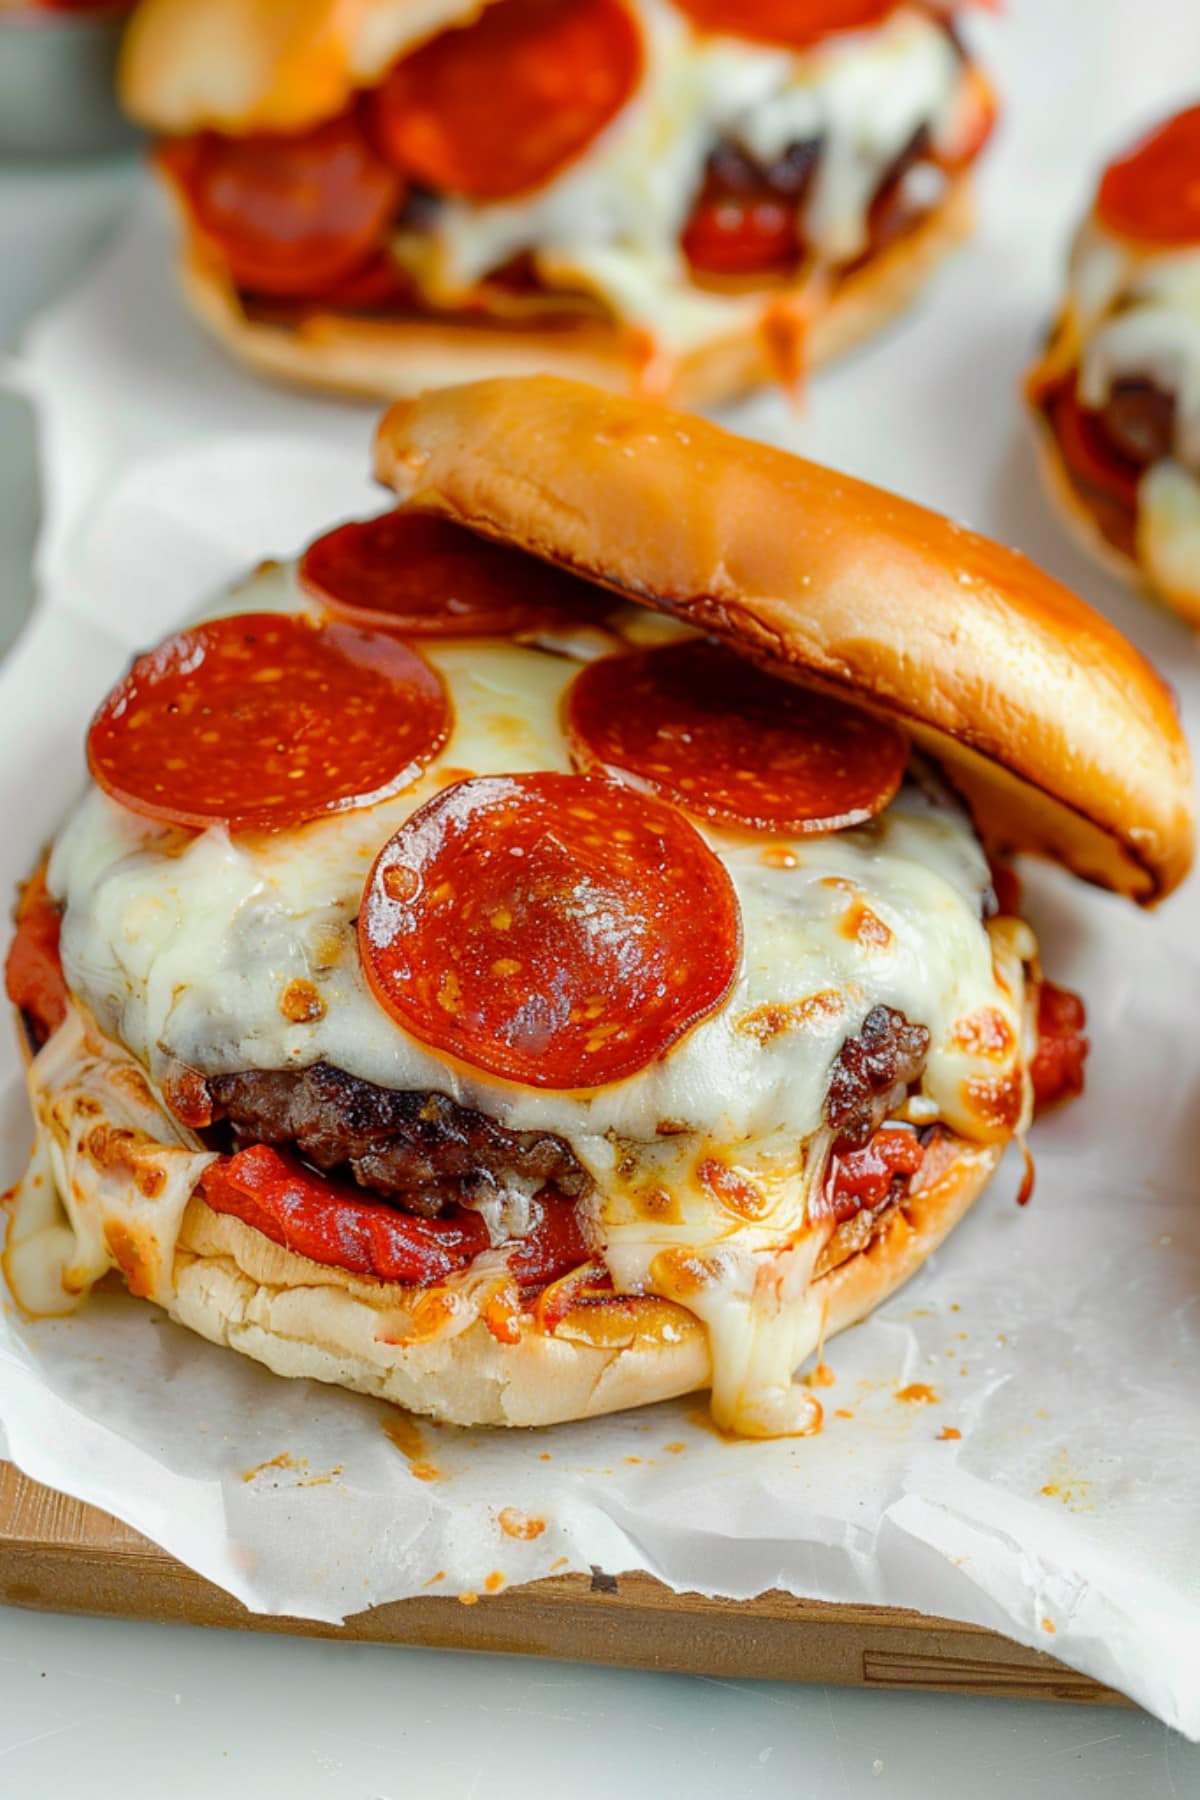 Delectable pizza burgers featuring beef patties, layered with melted cheese and pizza sauce